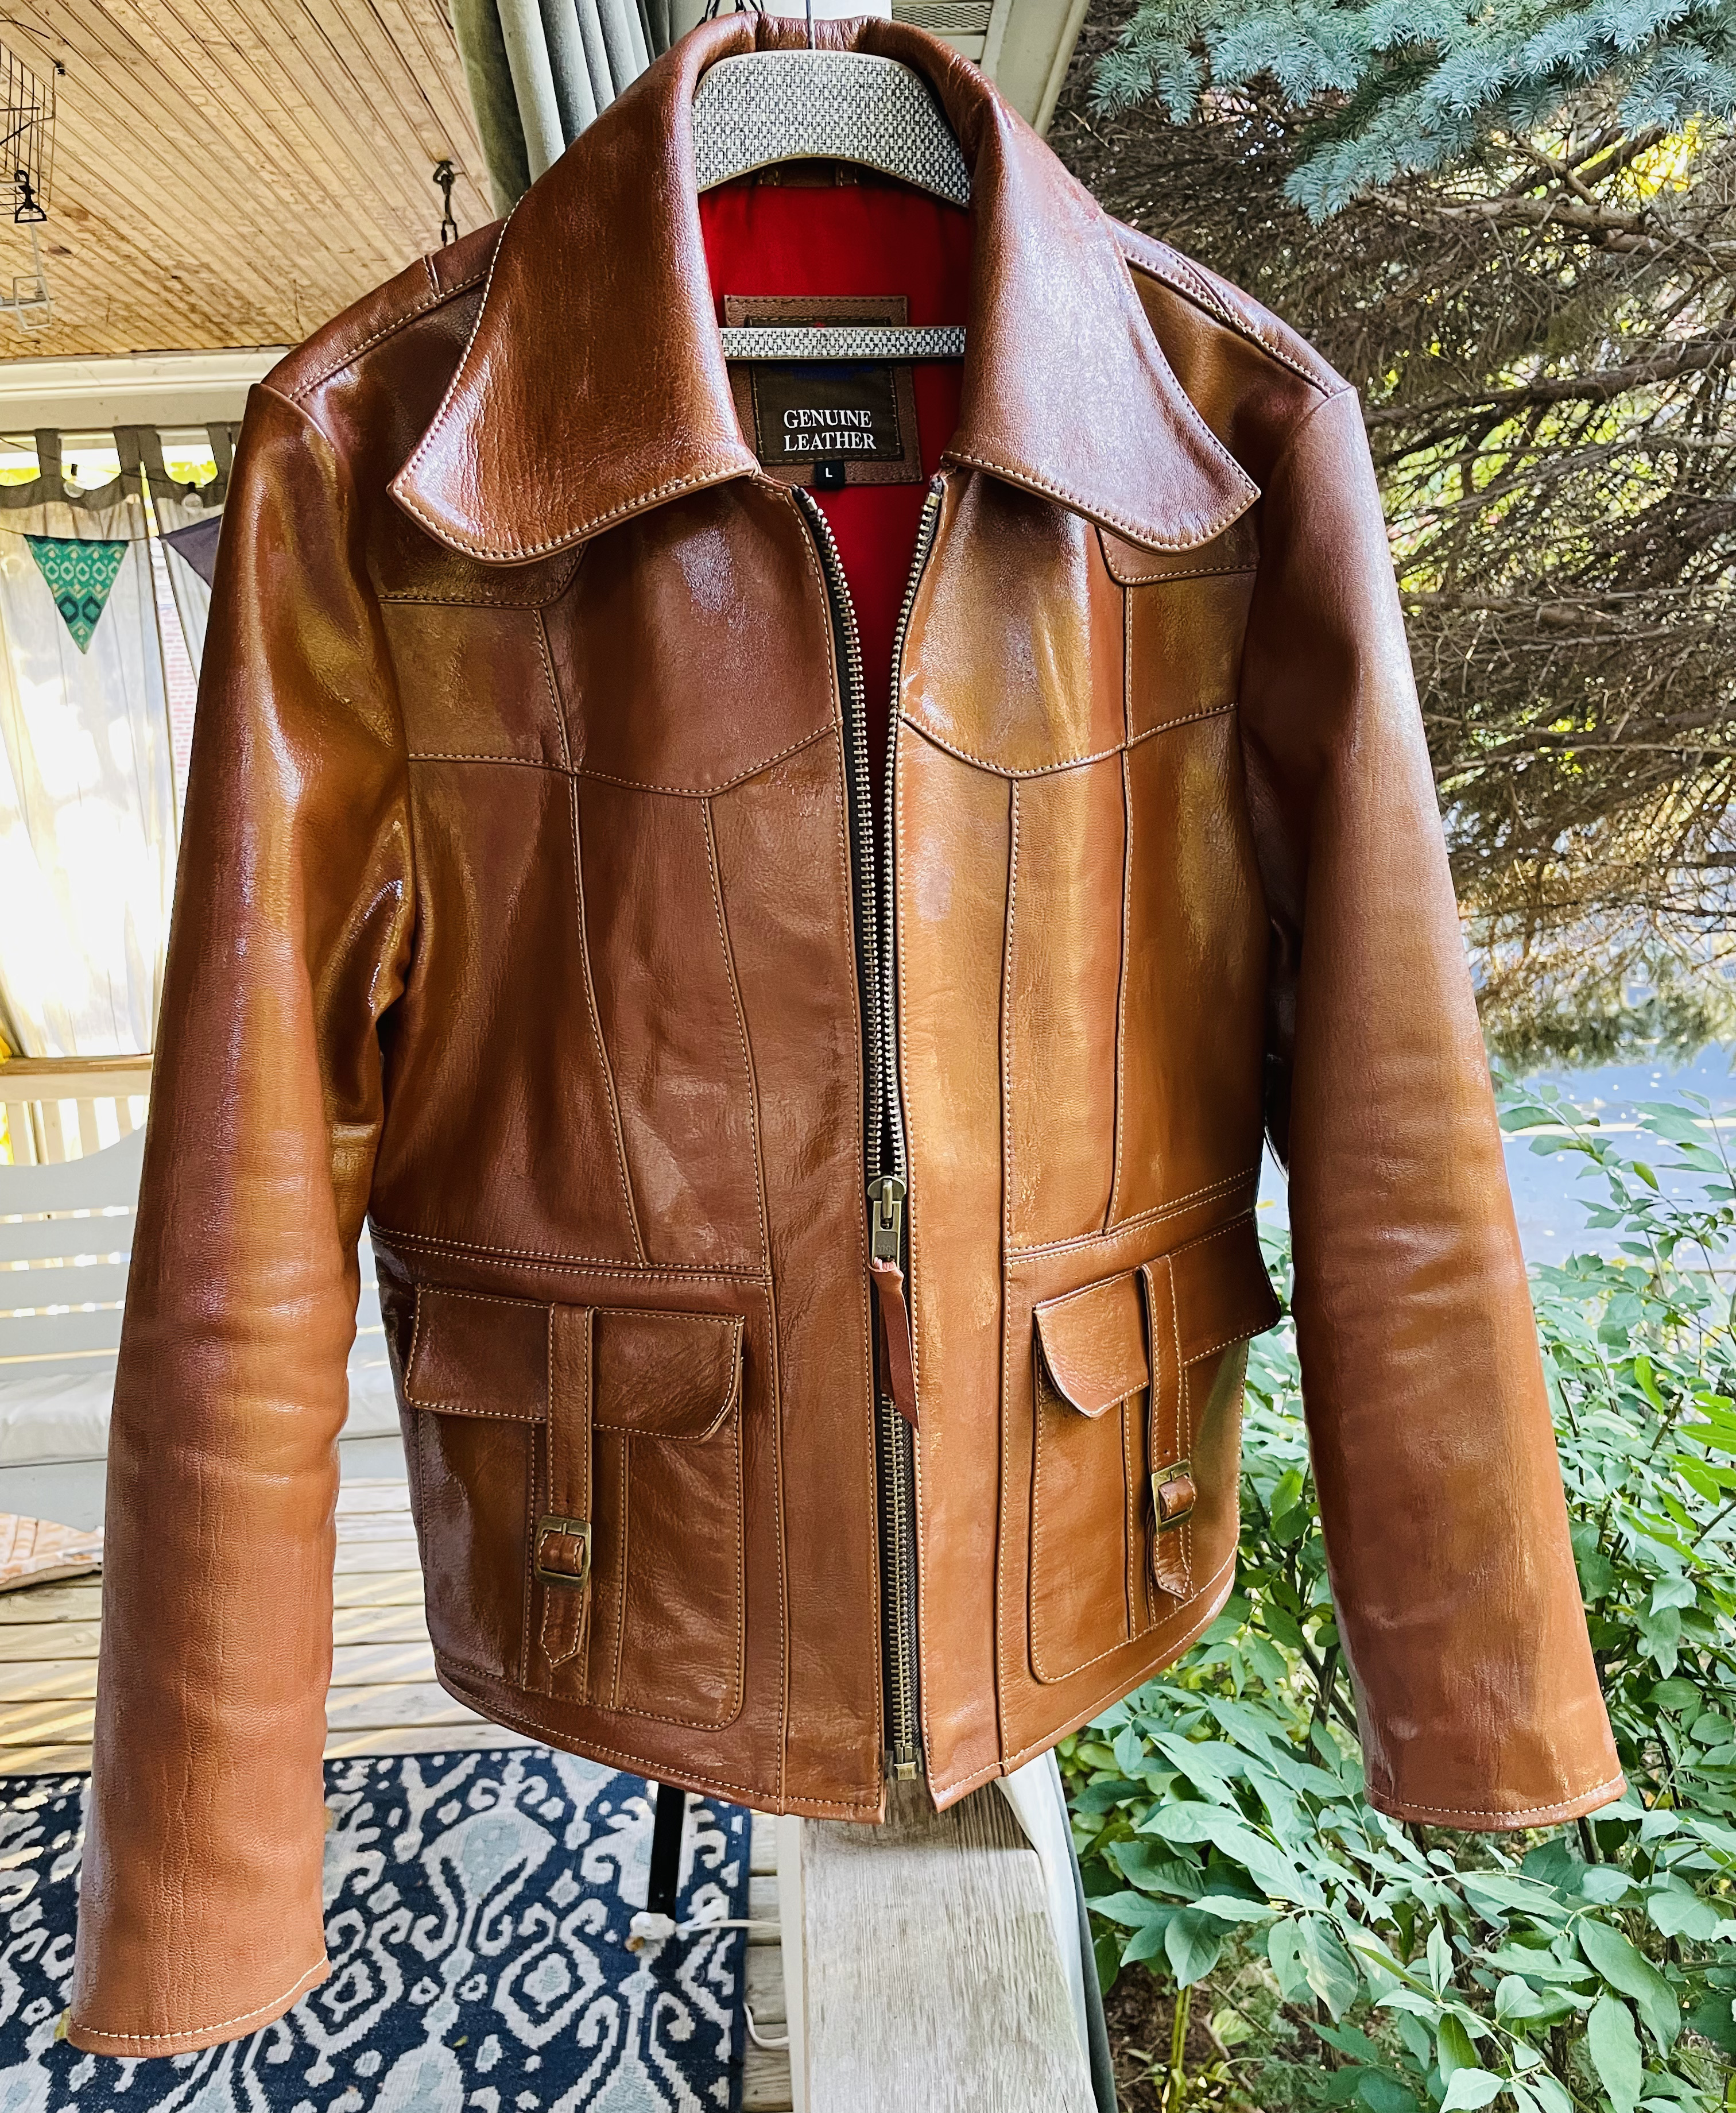 Five Star Leather Jackets | Page 219 | The Fedora Lounge